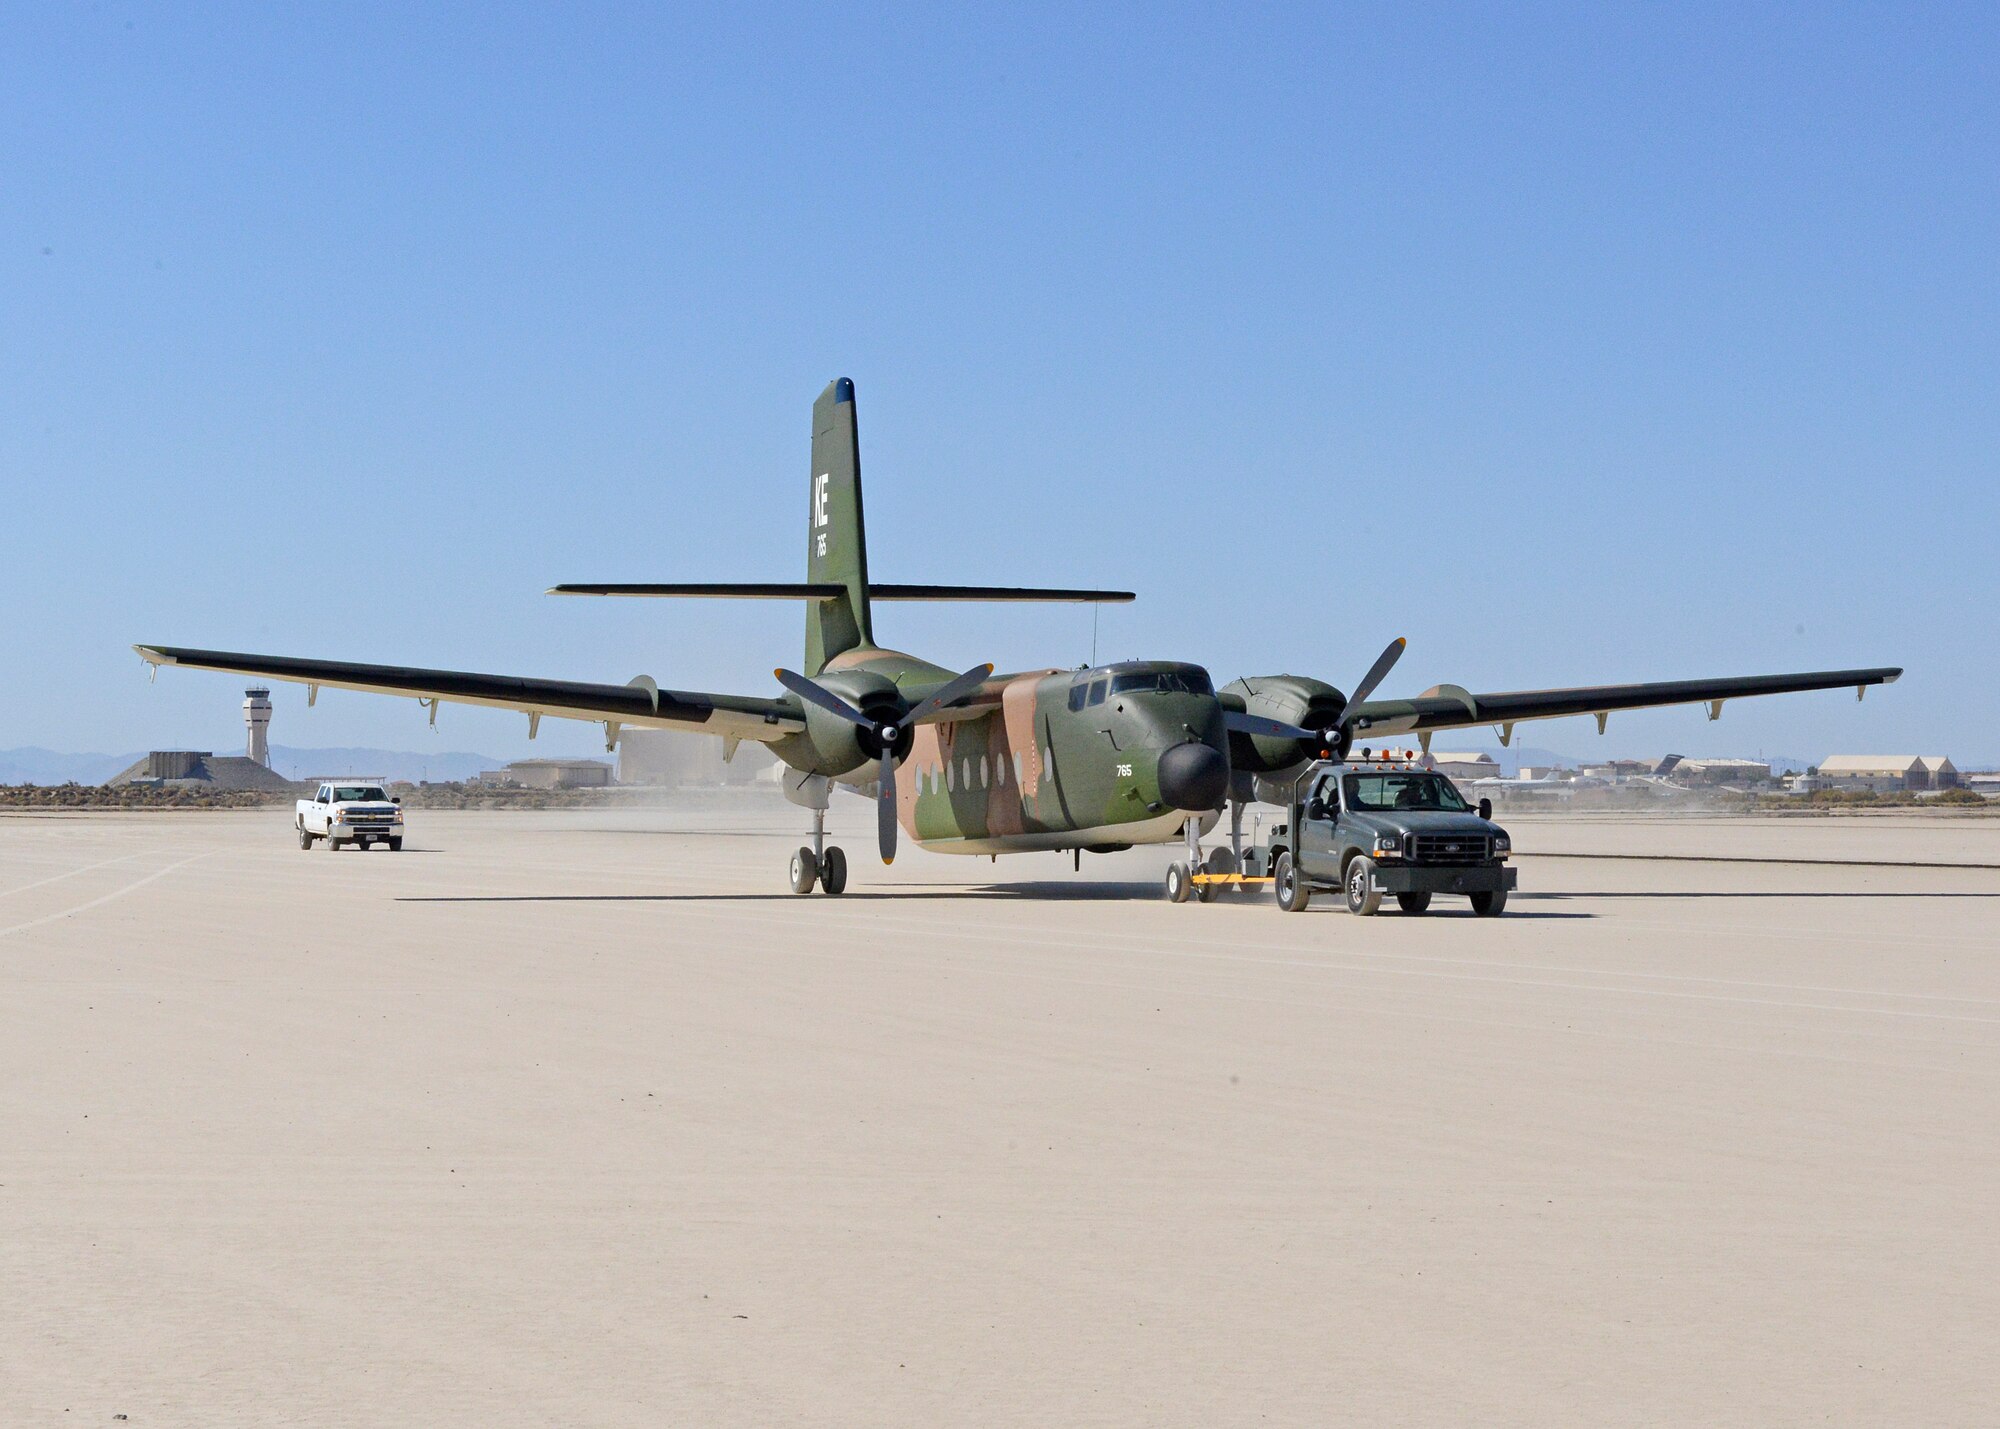 A C-7A Caribou is towed across Rogers Dry Lakebed from Edwards AFB's main base to the Air Force Flight Test Museum restoration hangar Oct. 15. (U.S. Air Force photo by Kenji Thuloweit)